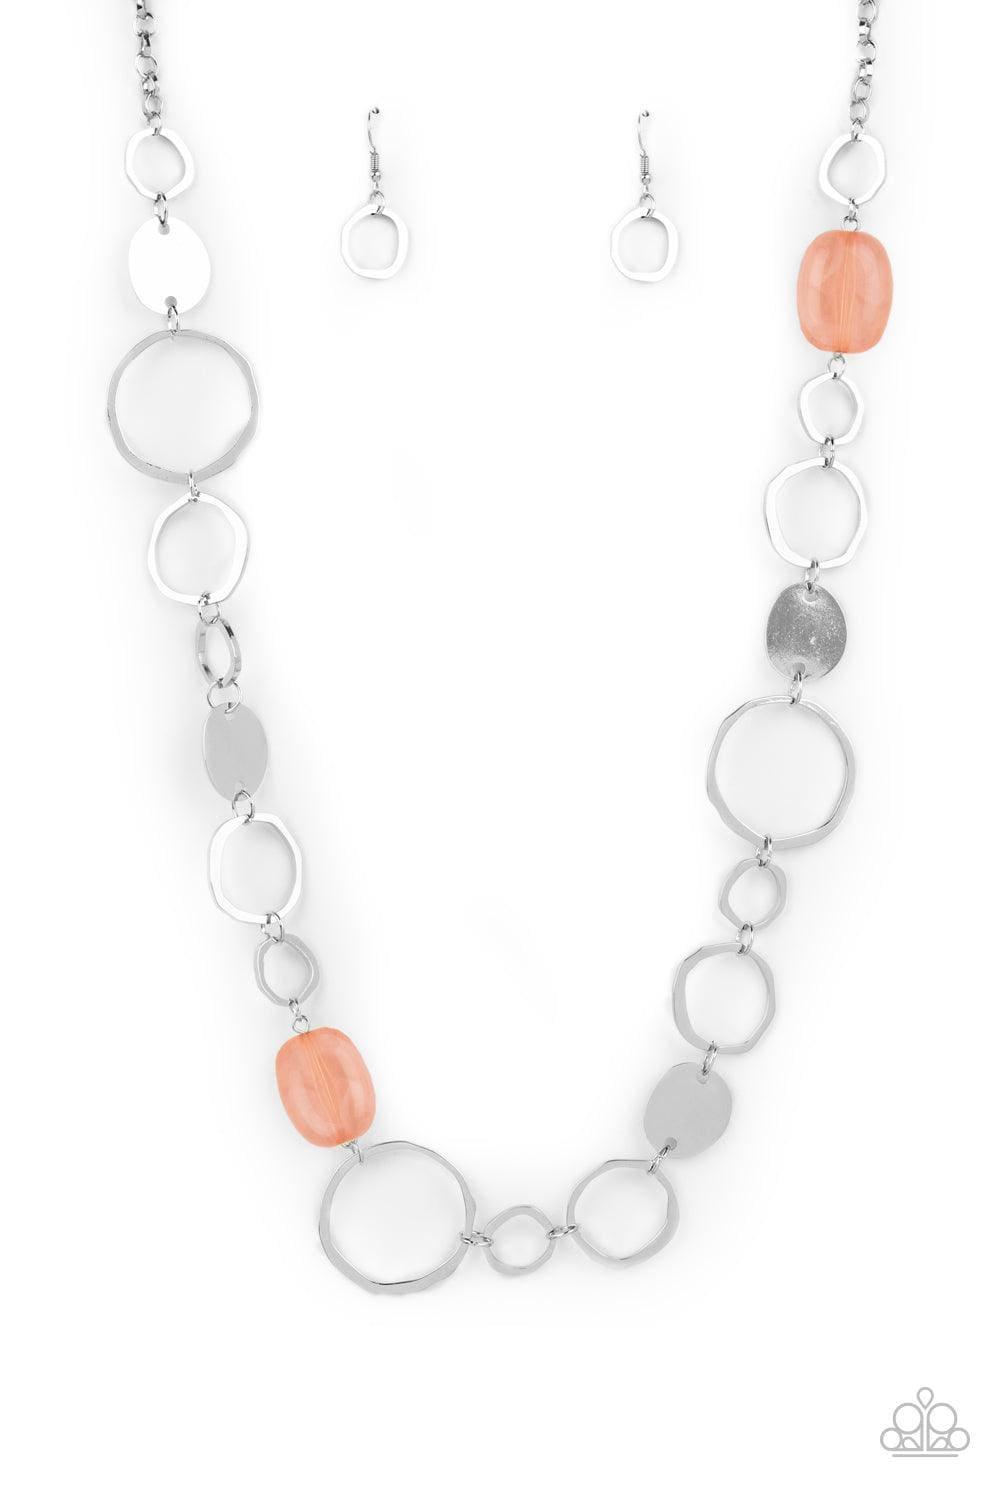 Paparazzi Accessories - Colorful Combo - Orange (Coral) Necklace - Bling by JessieK